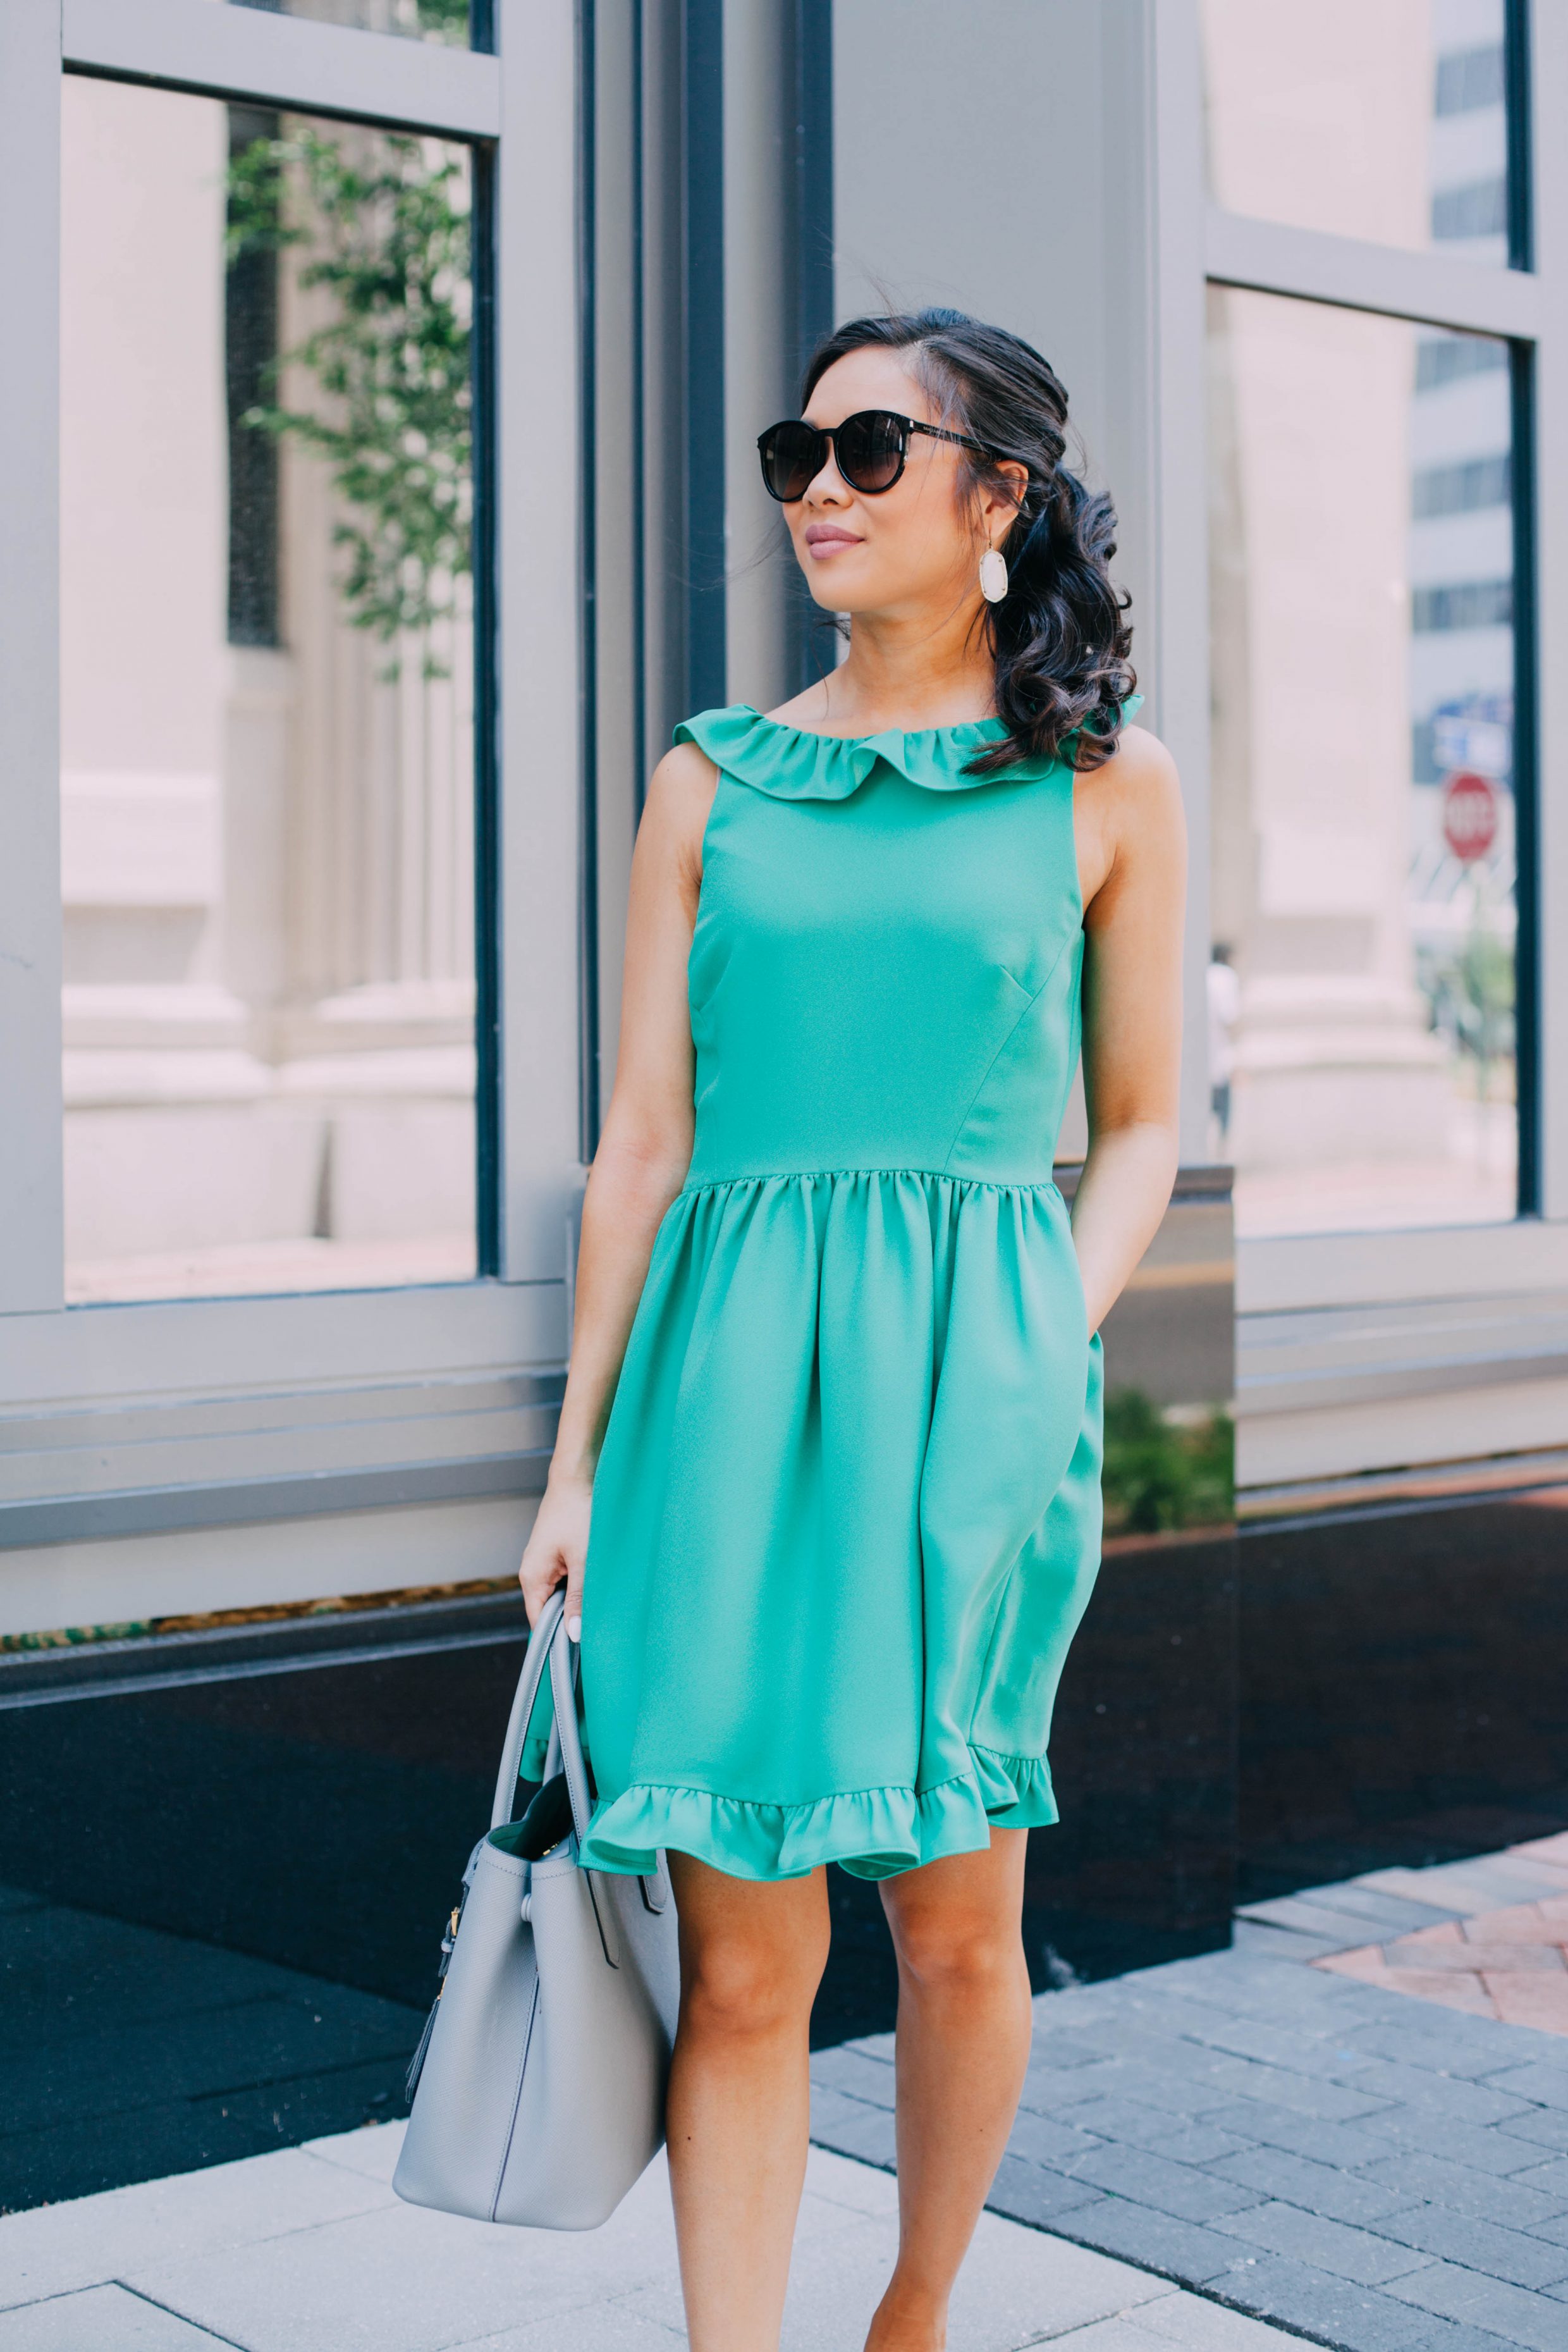 COLOR & CHIC | Ruffle Back Dress with Pockets for Work and the Weekend